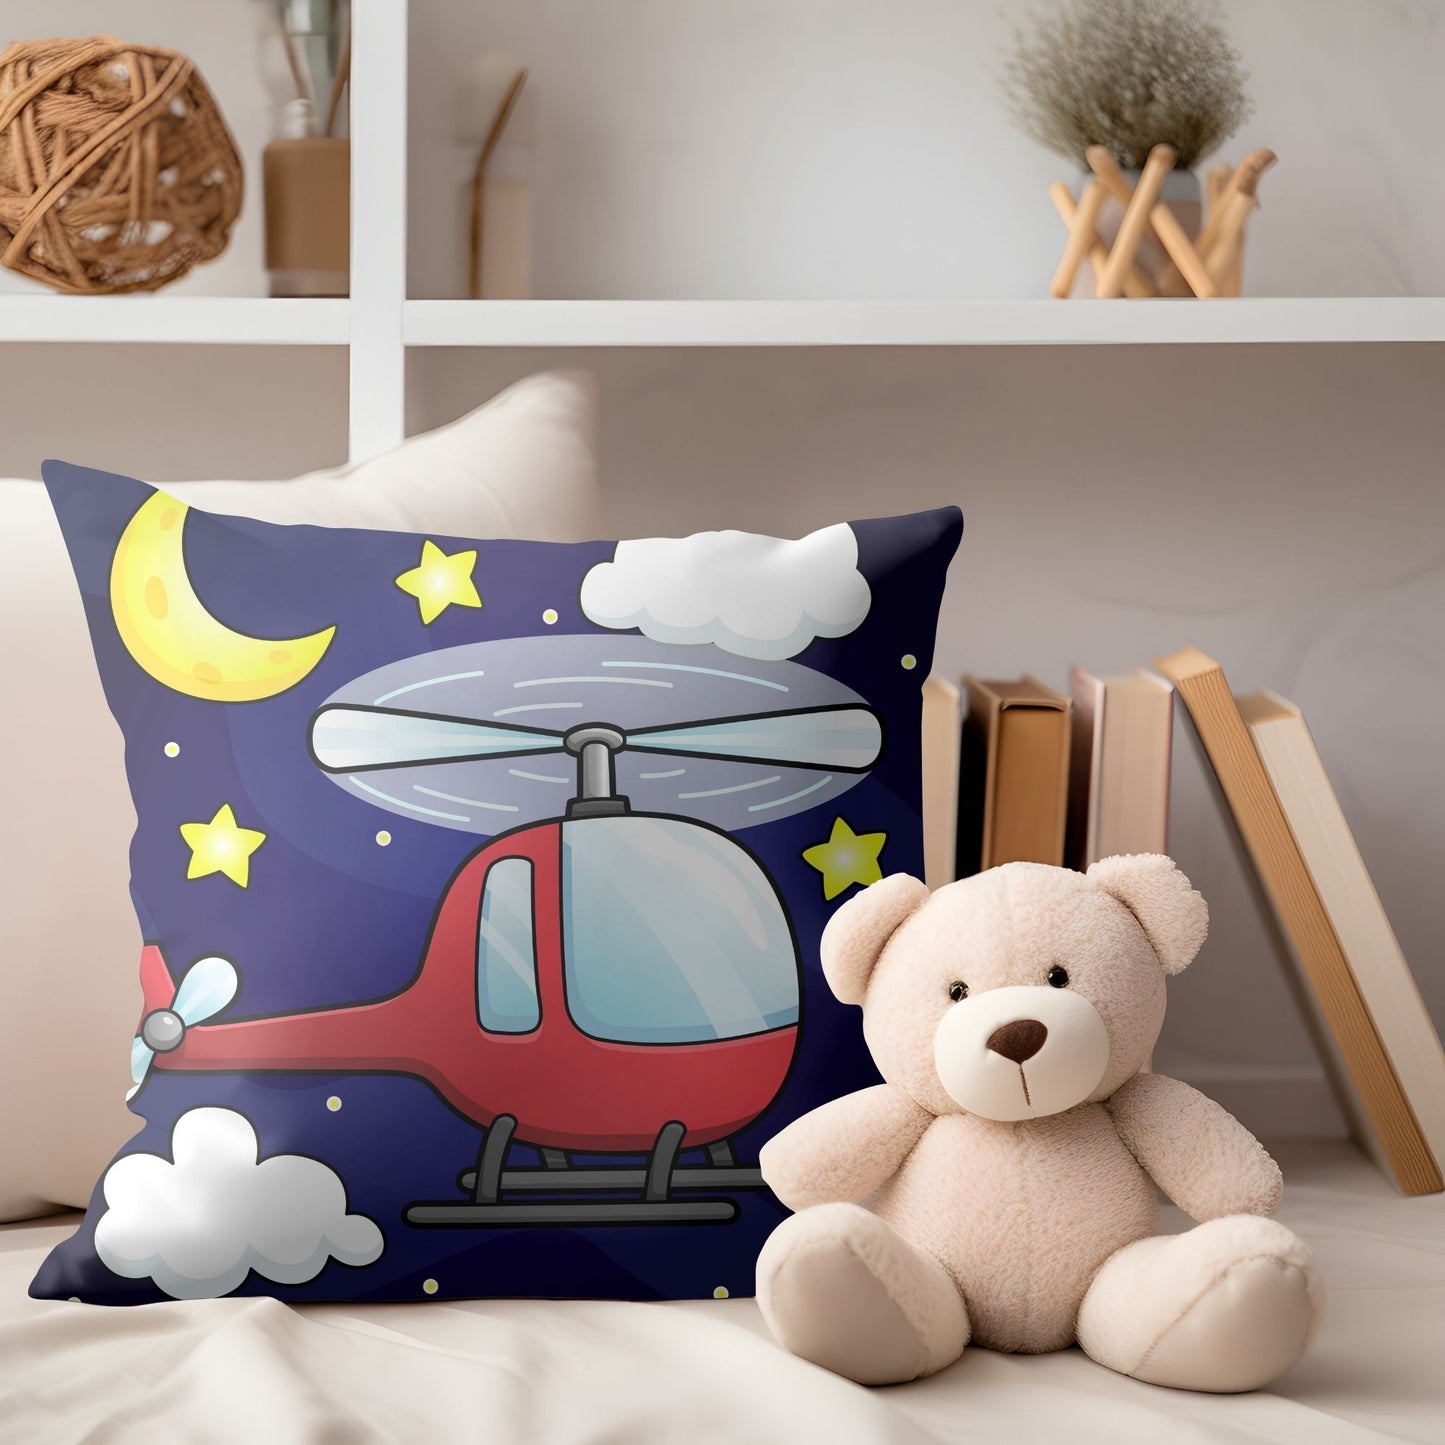 Whimsical kids pillow showcasing a red helicopter for imaginative play.